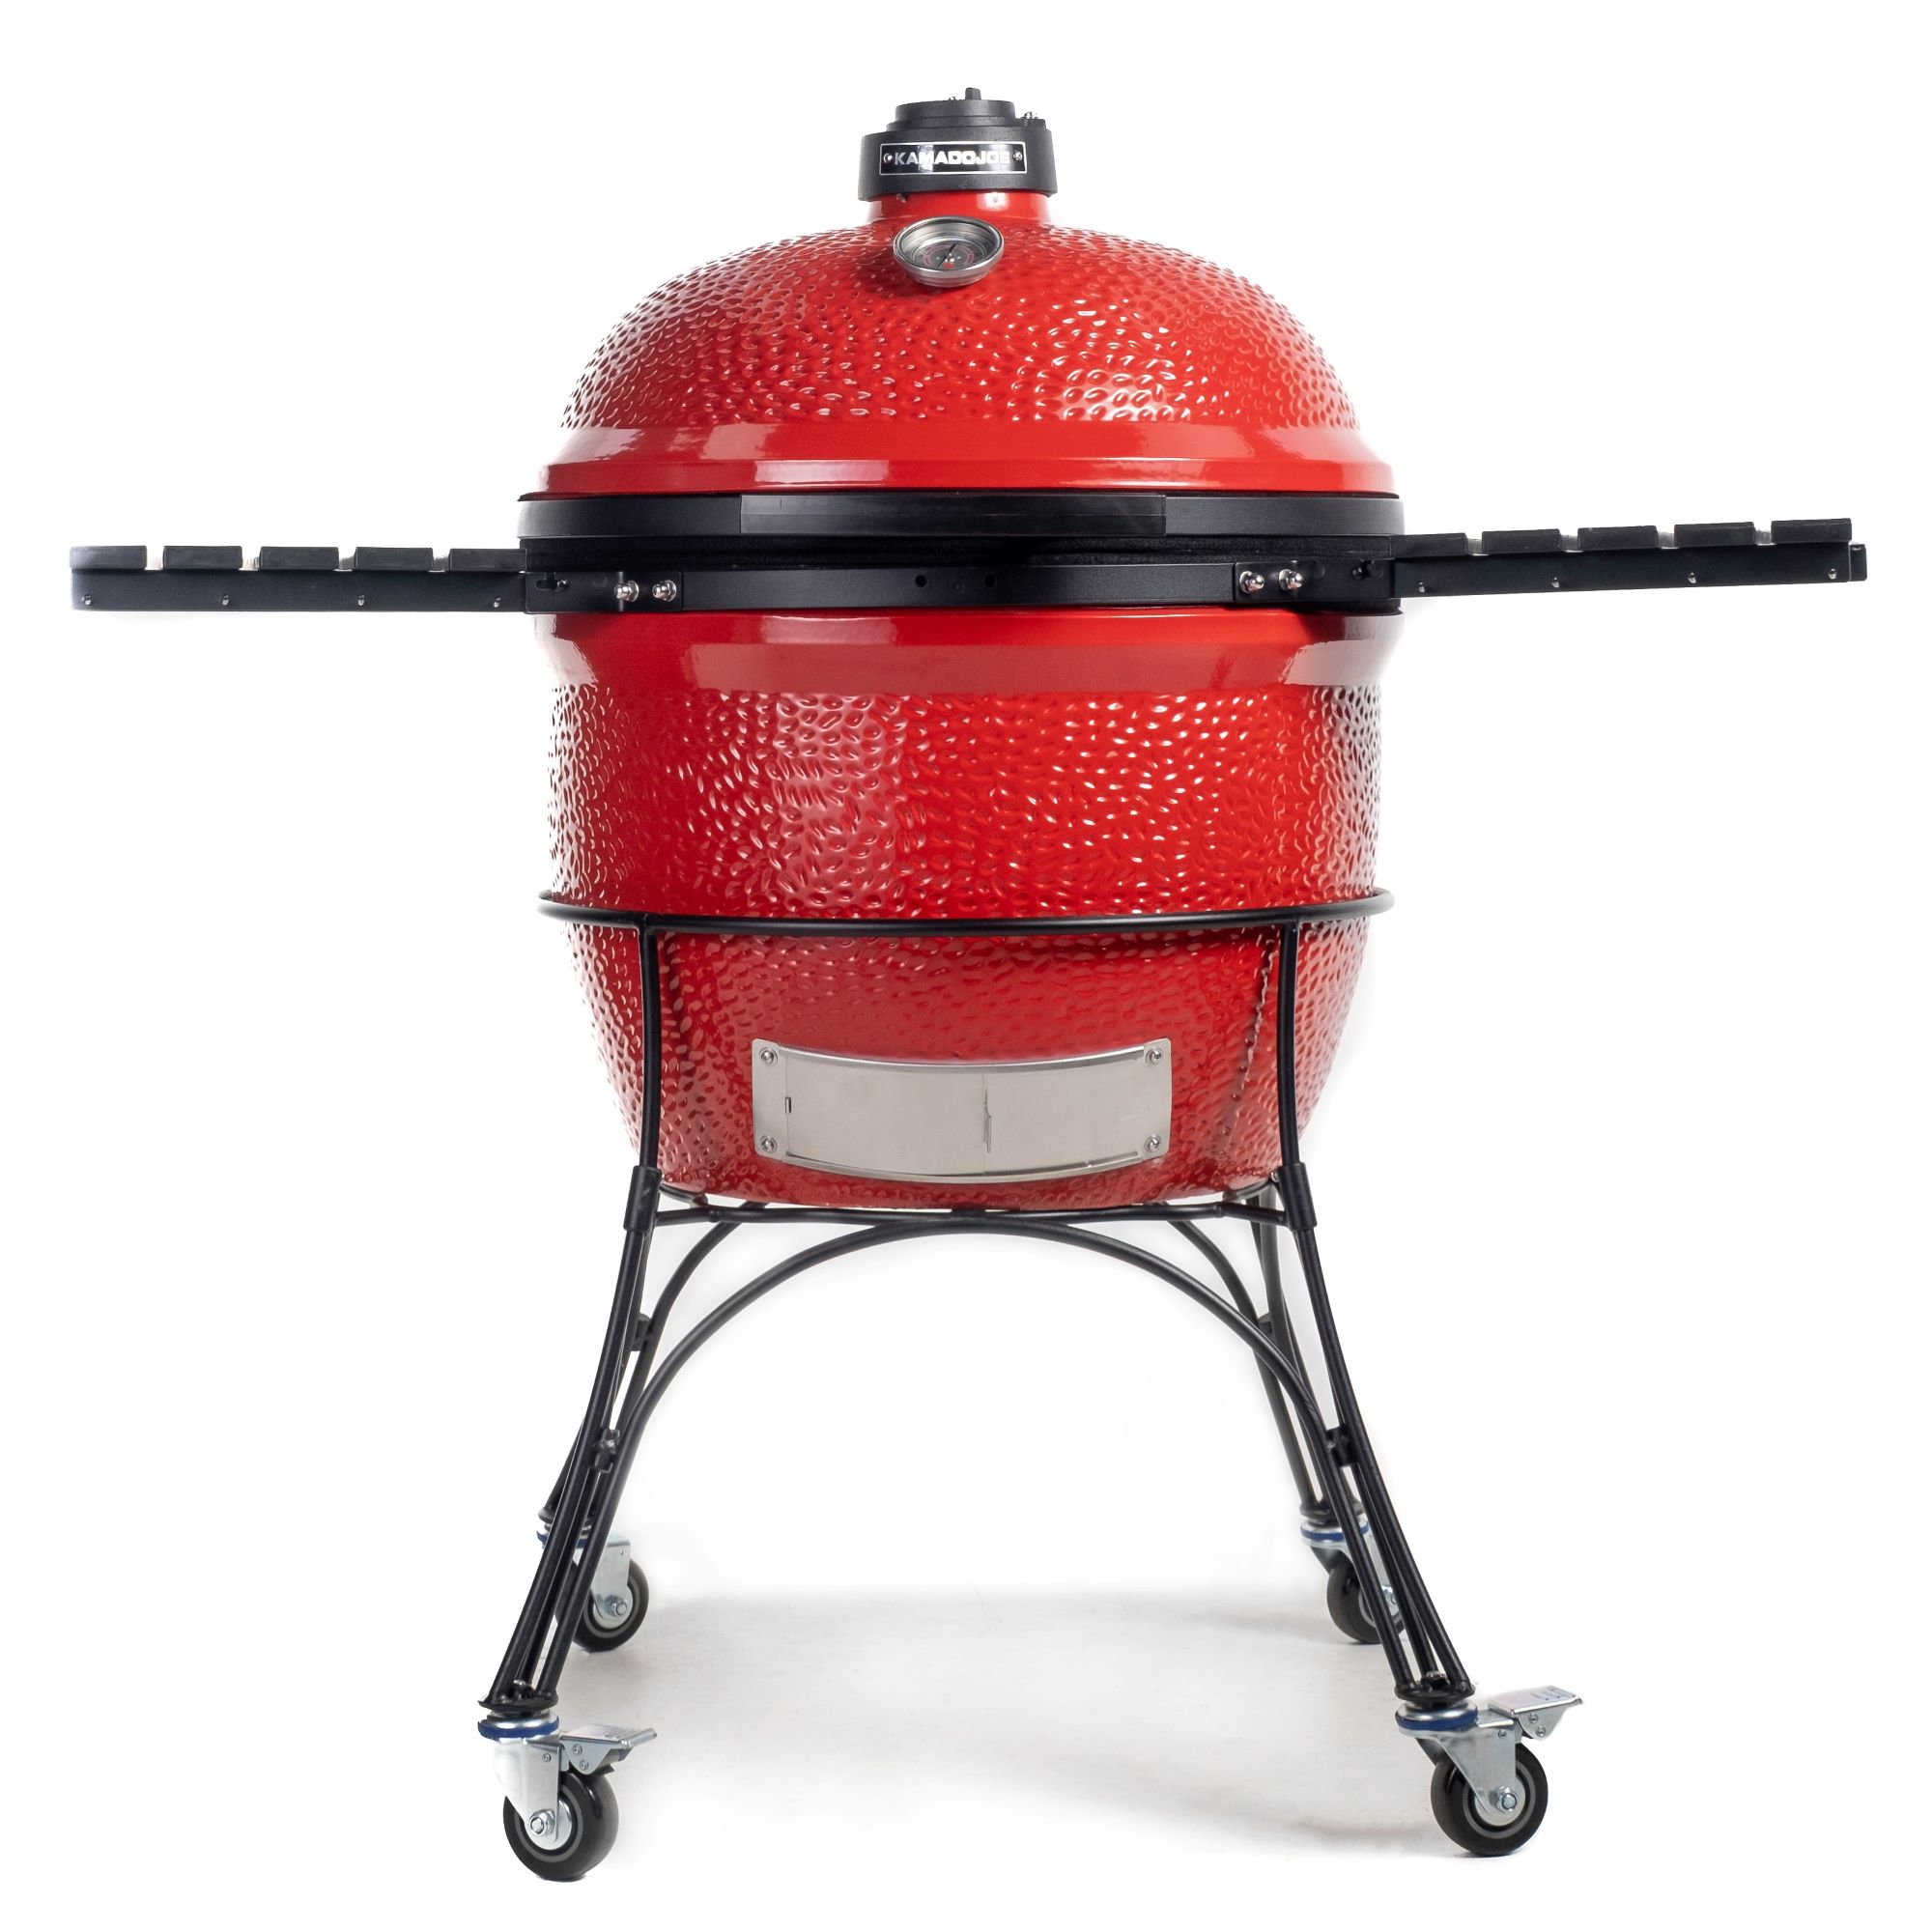 Kamado Joe Big Joe I 24 in. Charcoal Grill in Red with Cart, Side Shelves, Grill Gripper, and Ash Tool - image 1 of 12